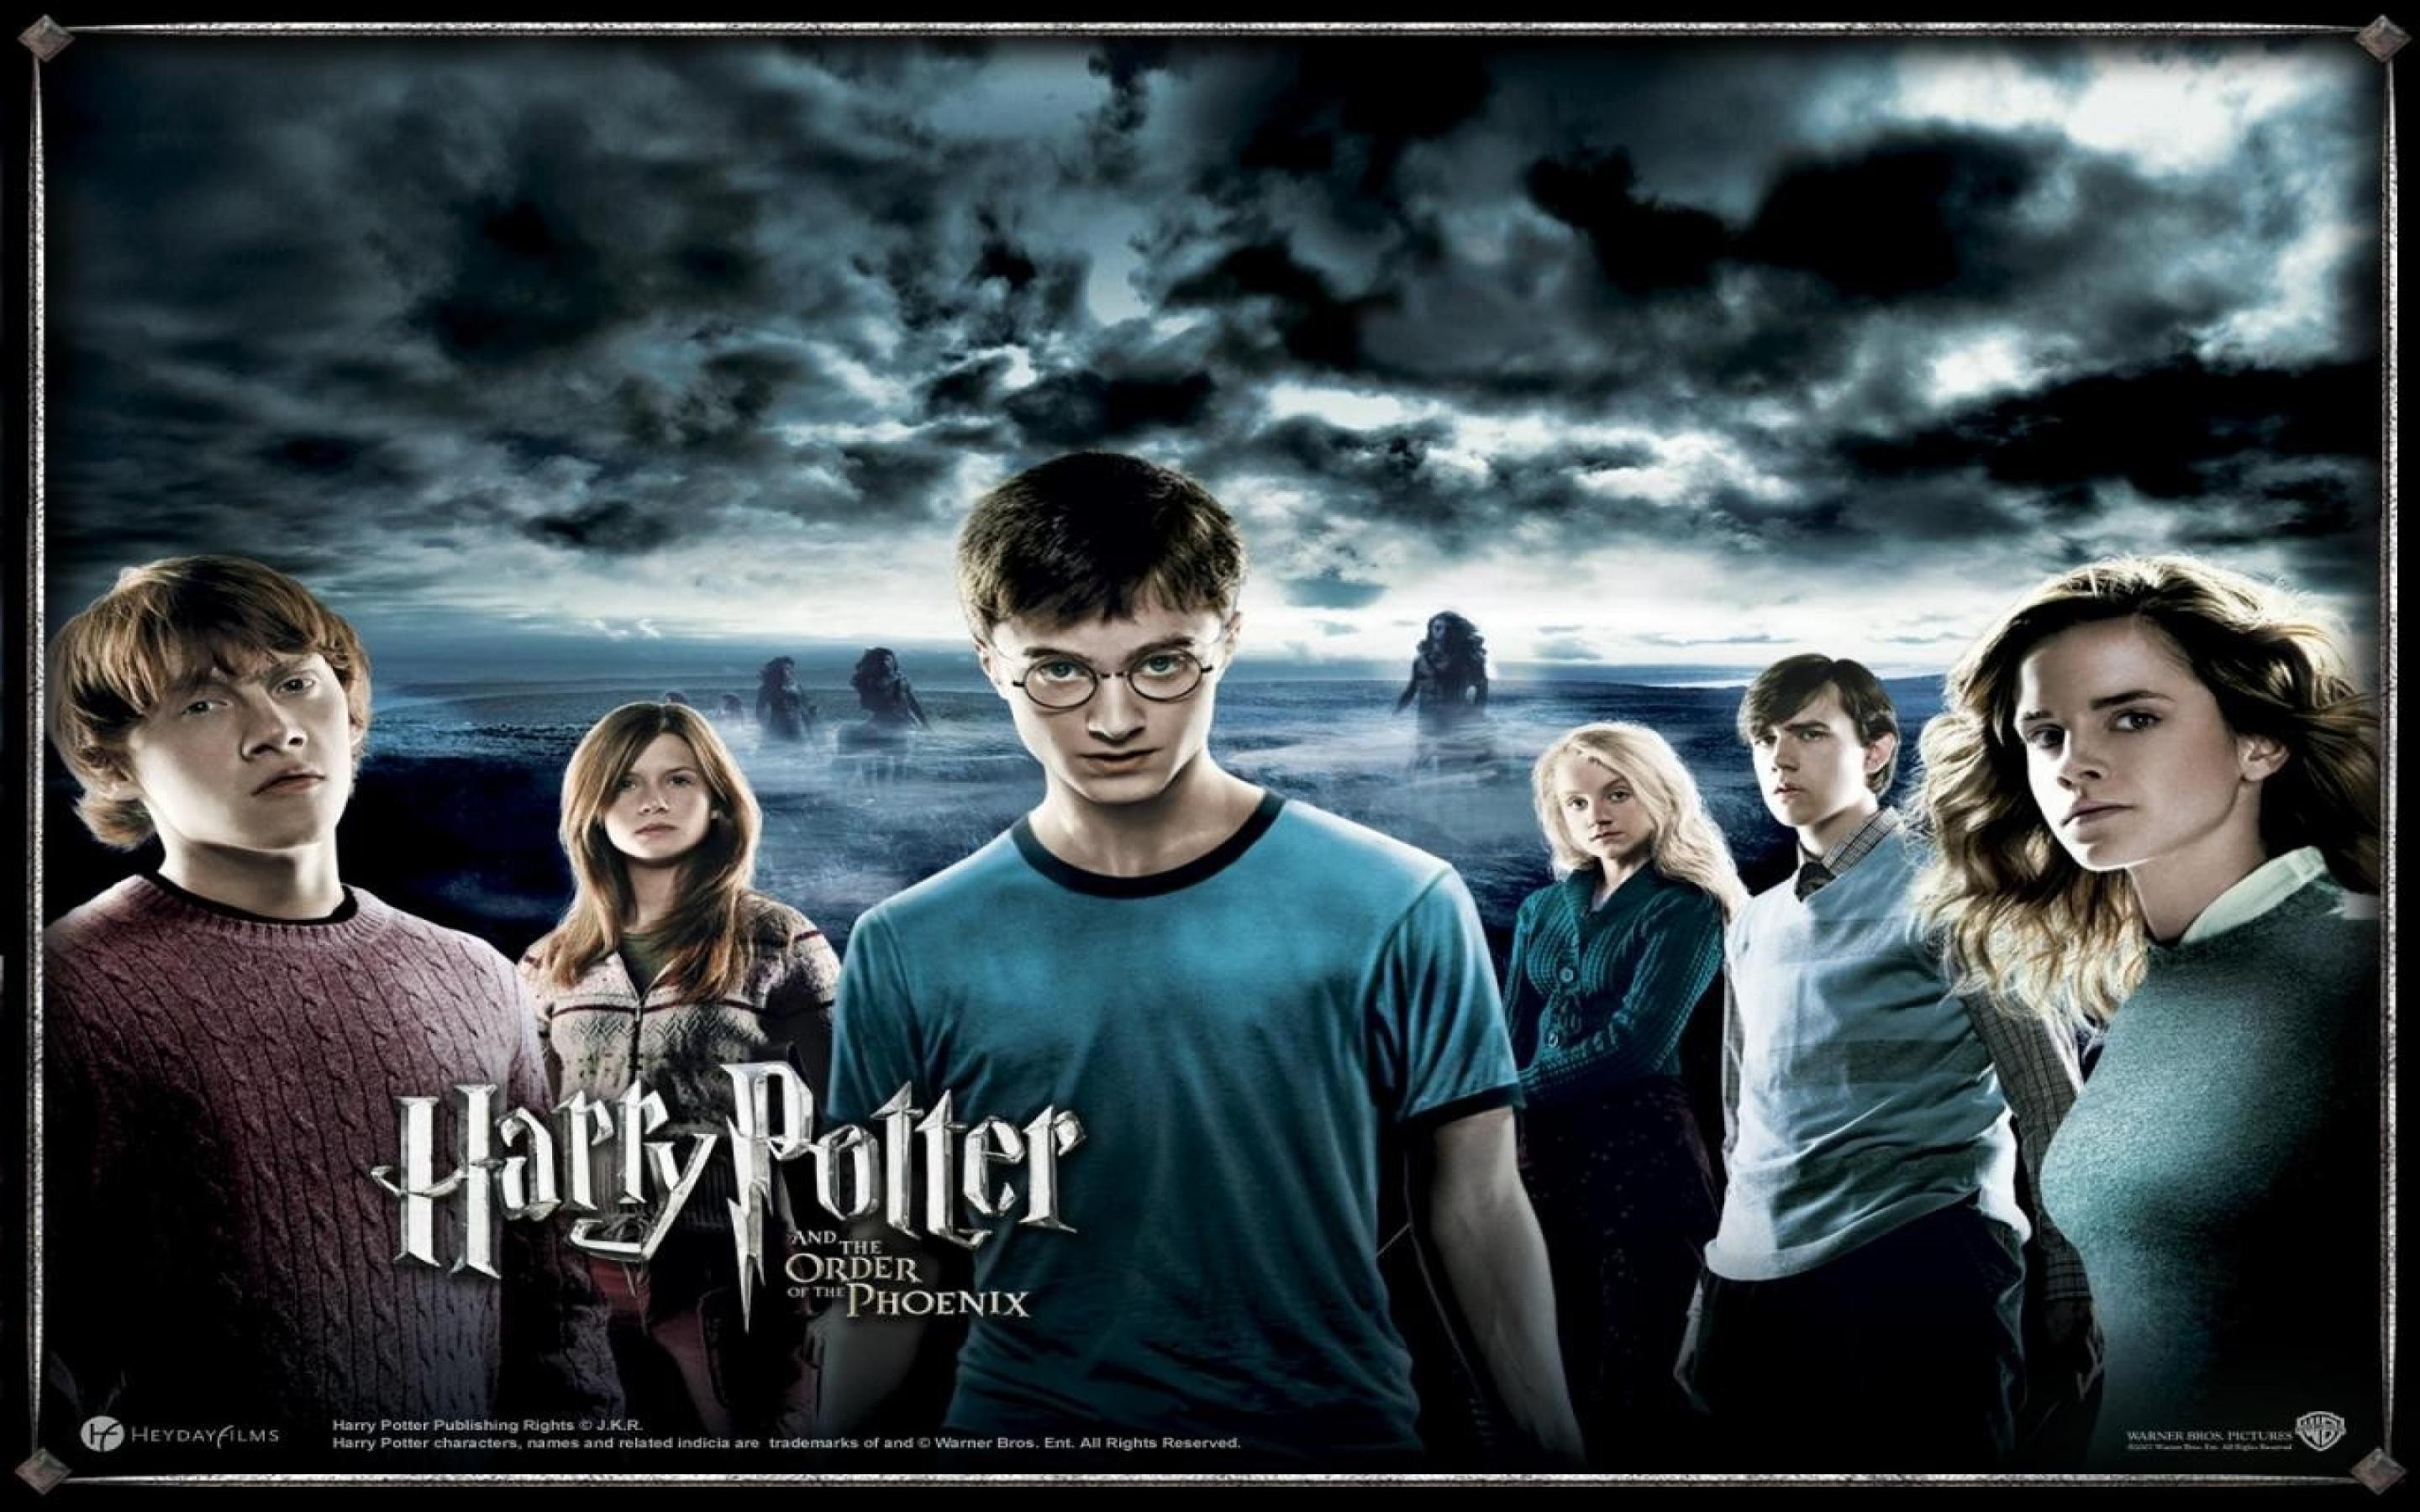 all harry potter movies download free